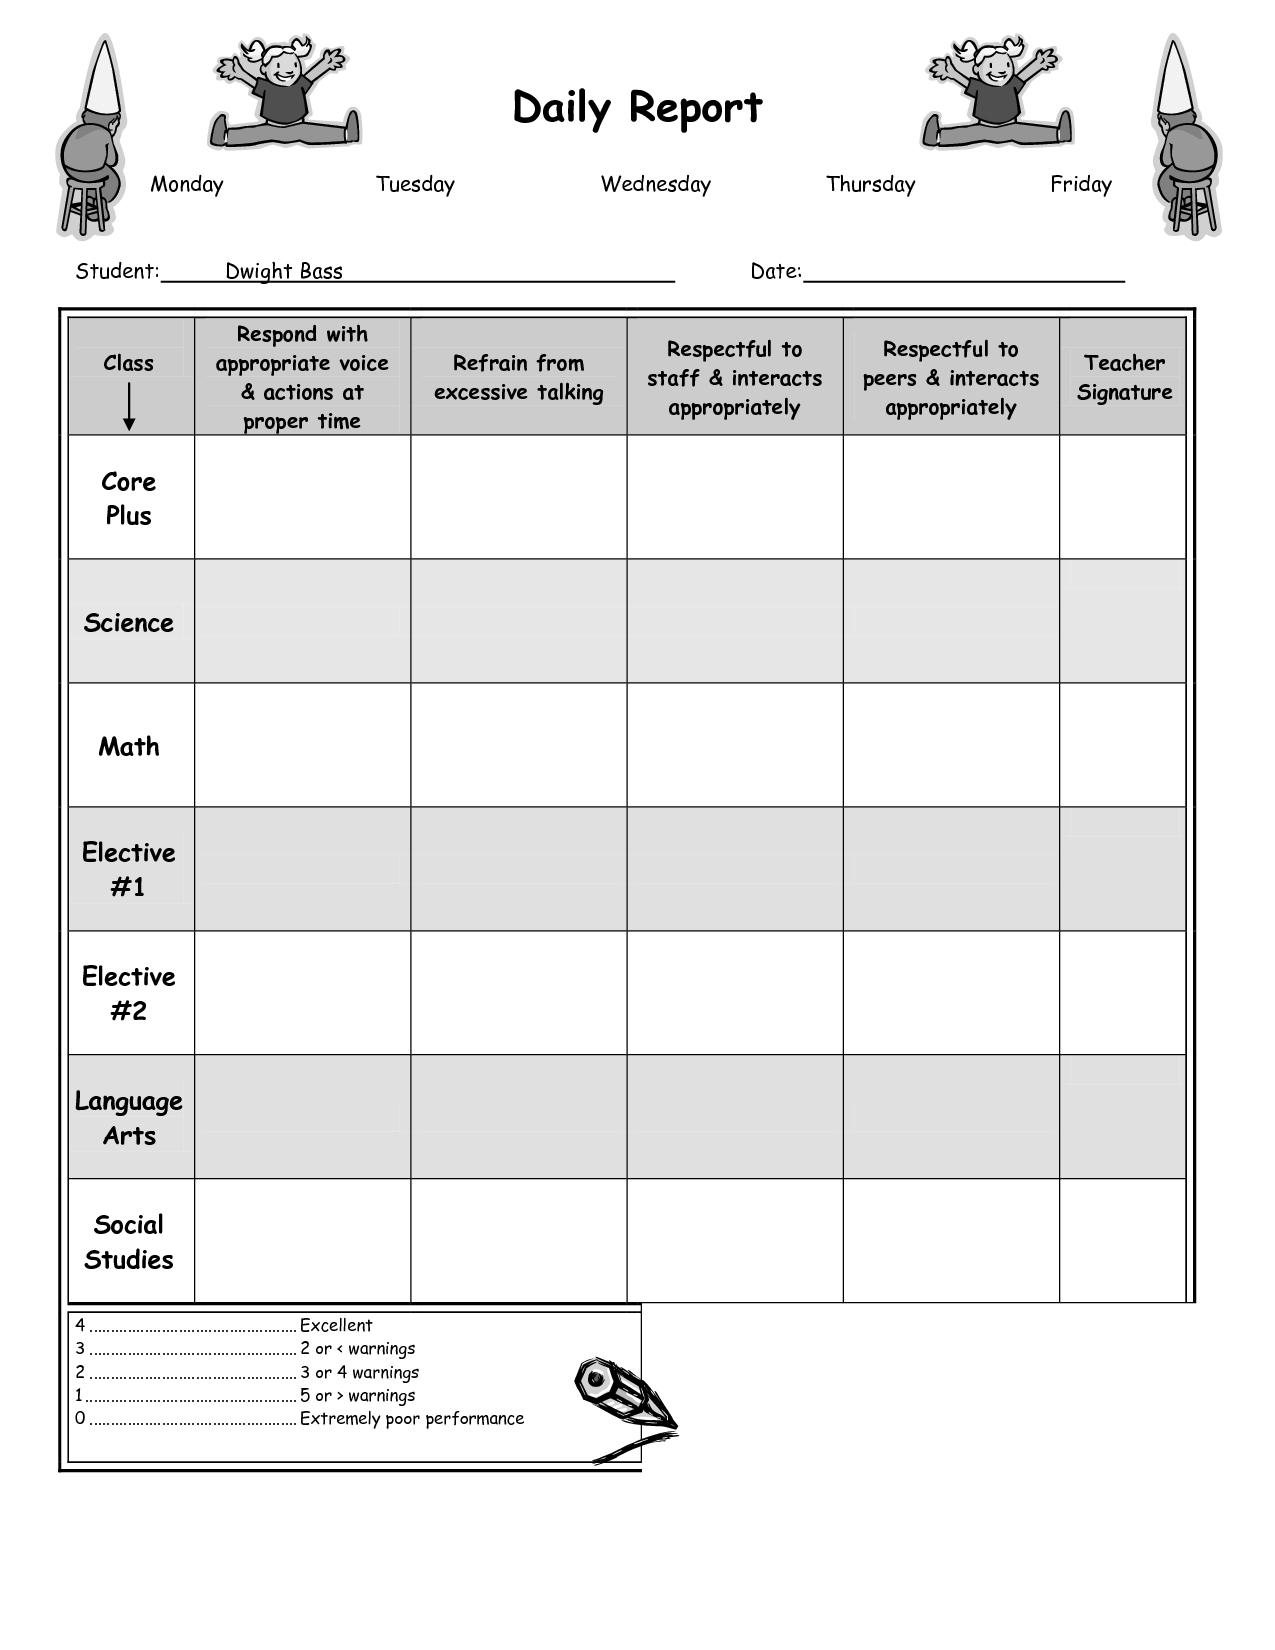 Daily Report Card Template For Adhd - Best Professional Intended For Daily Report Card Template For Adhd